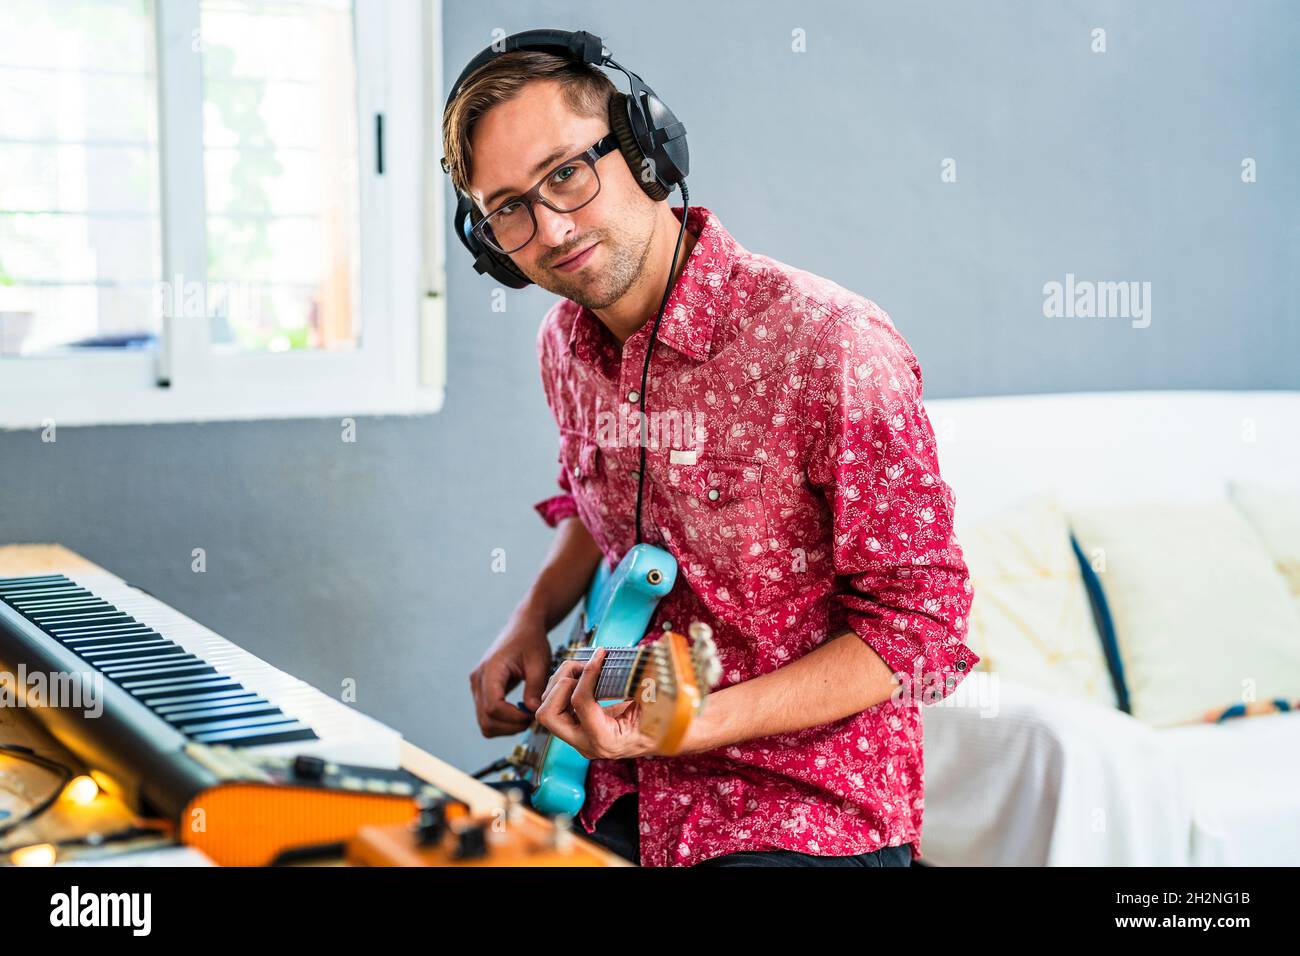 Male guitarist with headphones playing guitar at home Stock Photo